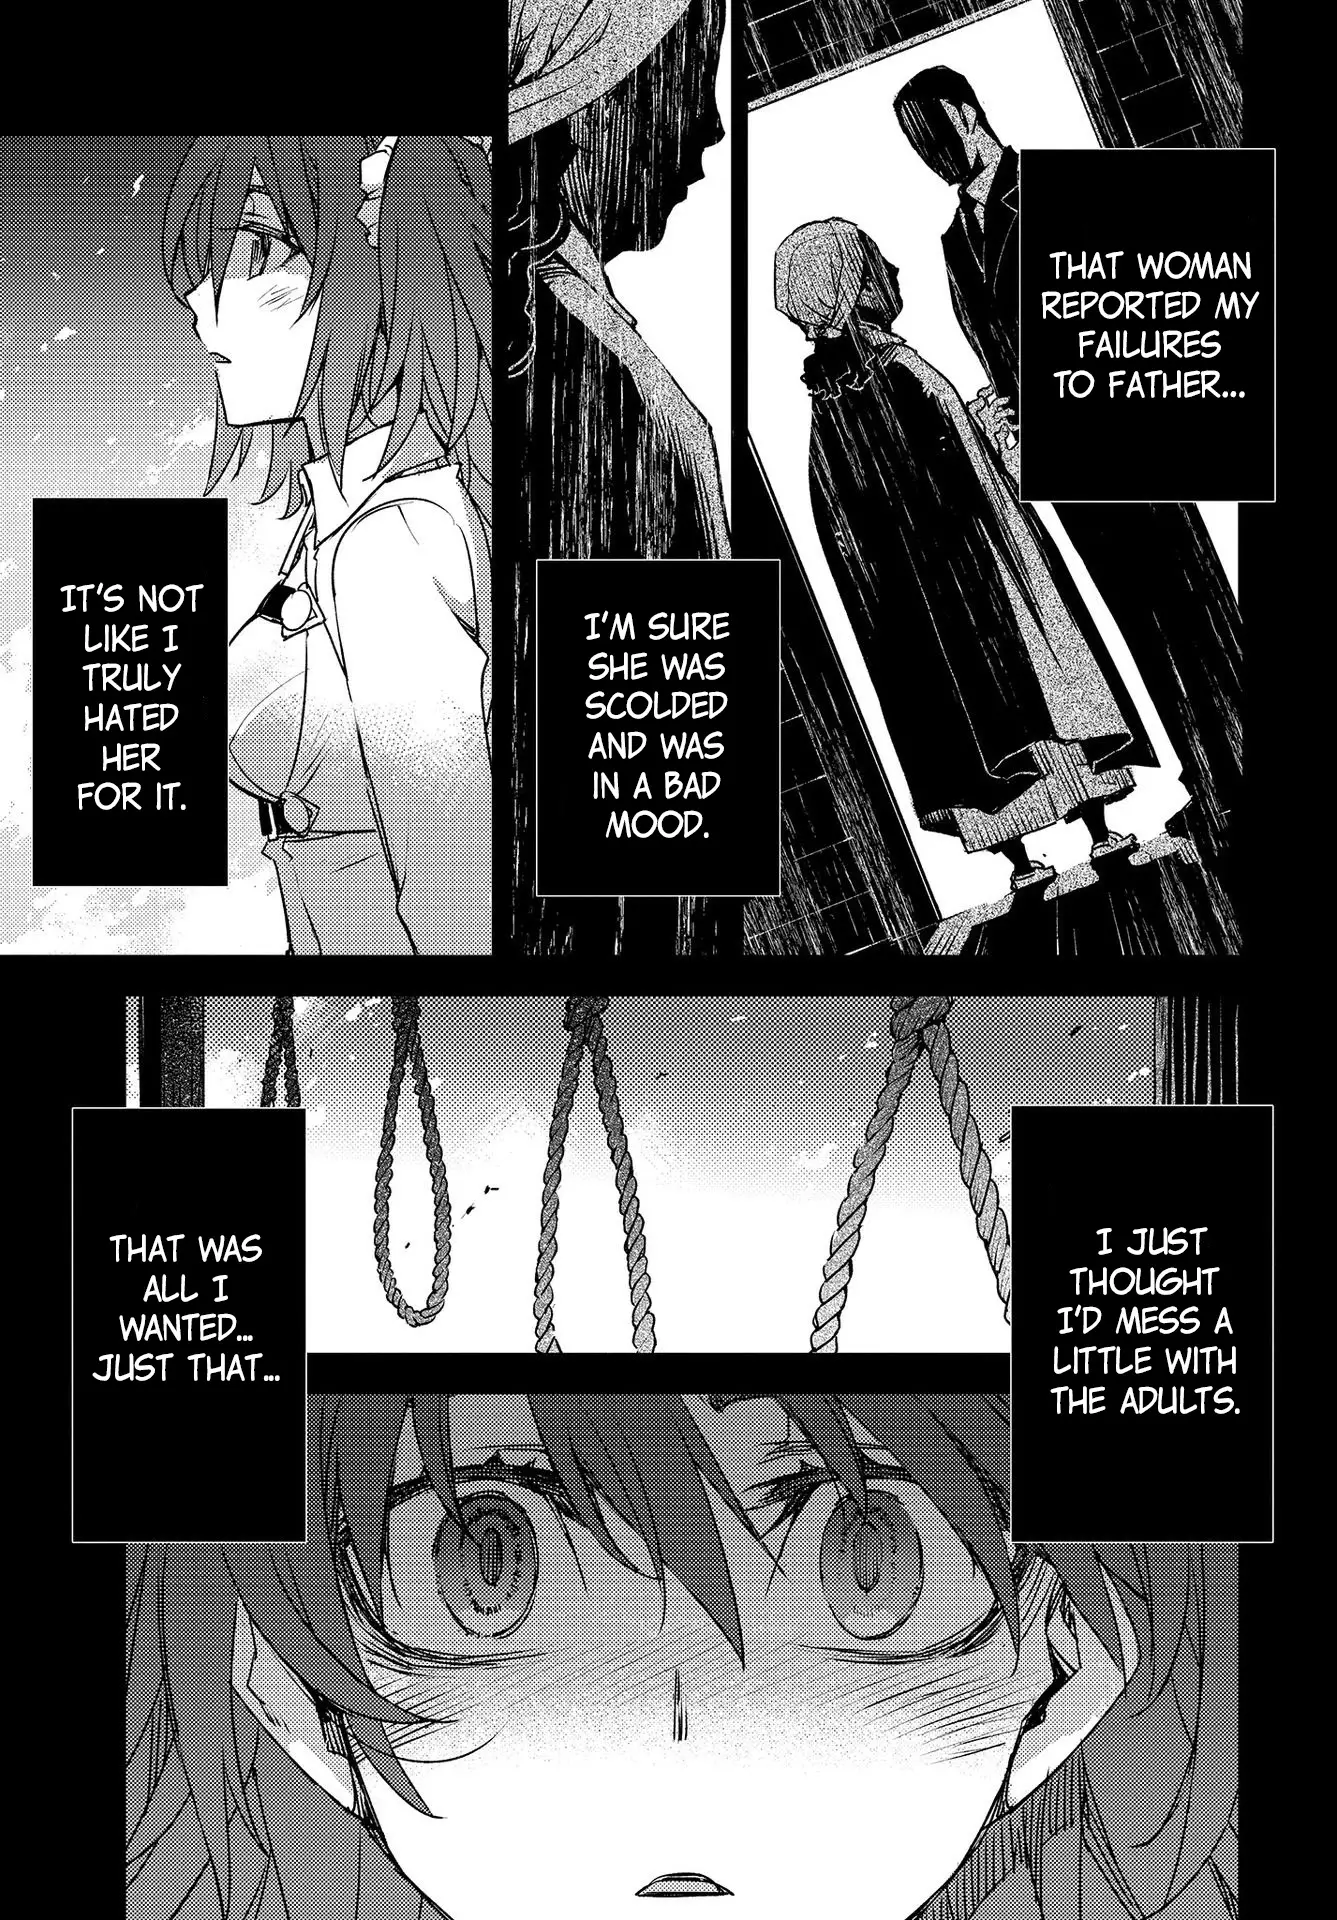 Fate/grand Order: Epic Of Remnant - Subspecies Singularity Iv: Taboo Advent Salem: Salem Of Heresy - 10 page 9